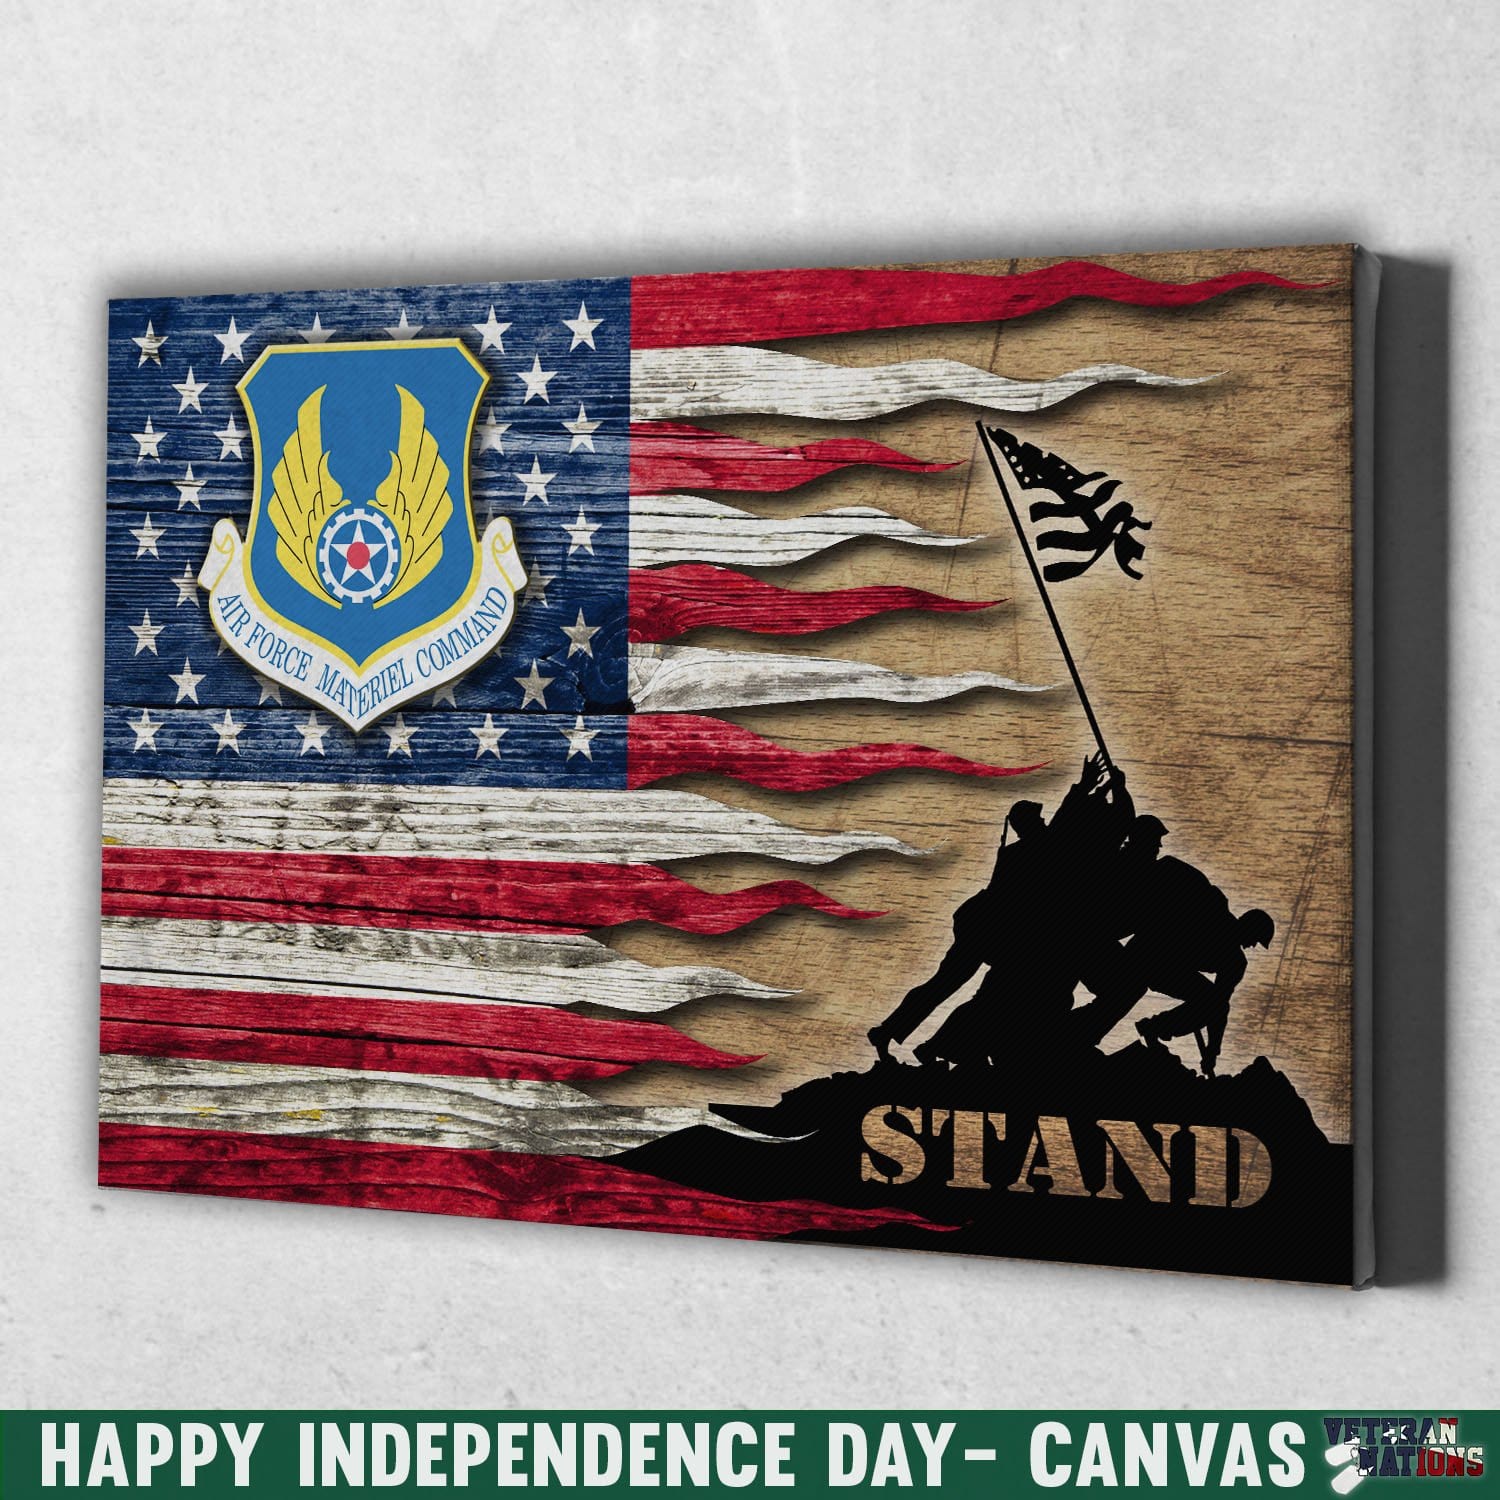 Us Air Force Materiel Command Stand For The Flag 12X8 Inches Landscape Canvas .75In Frame